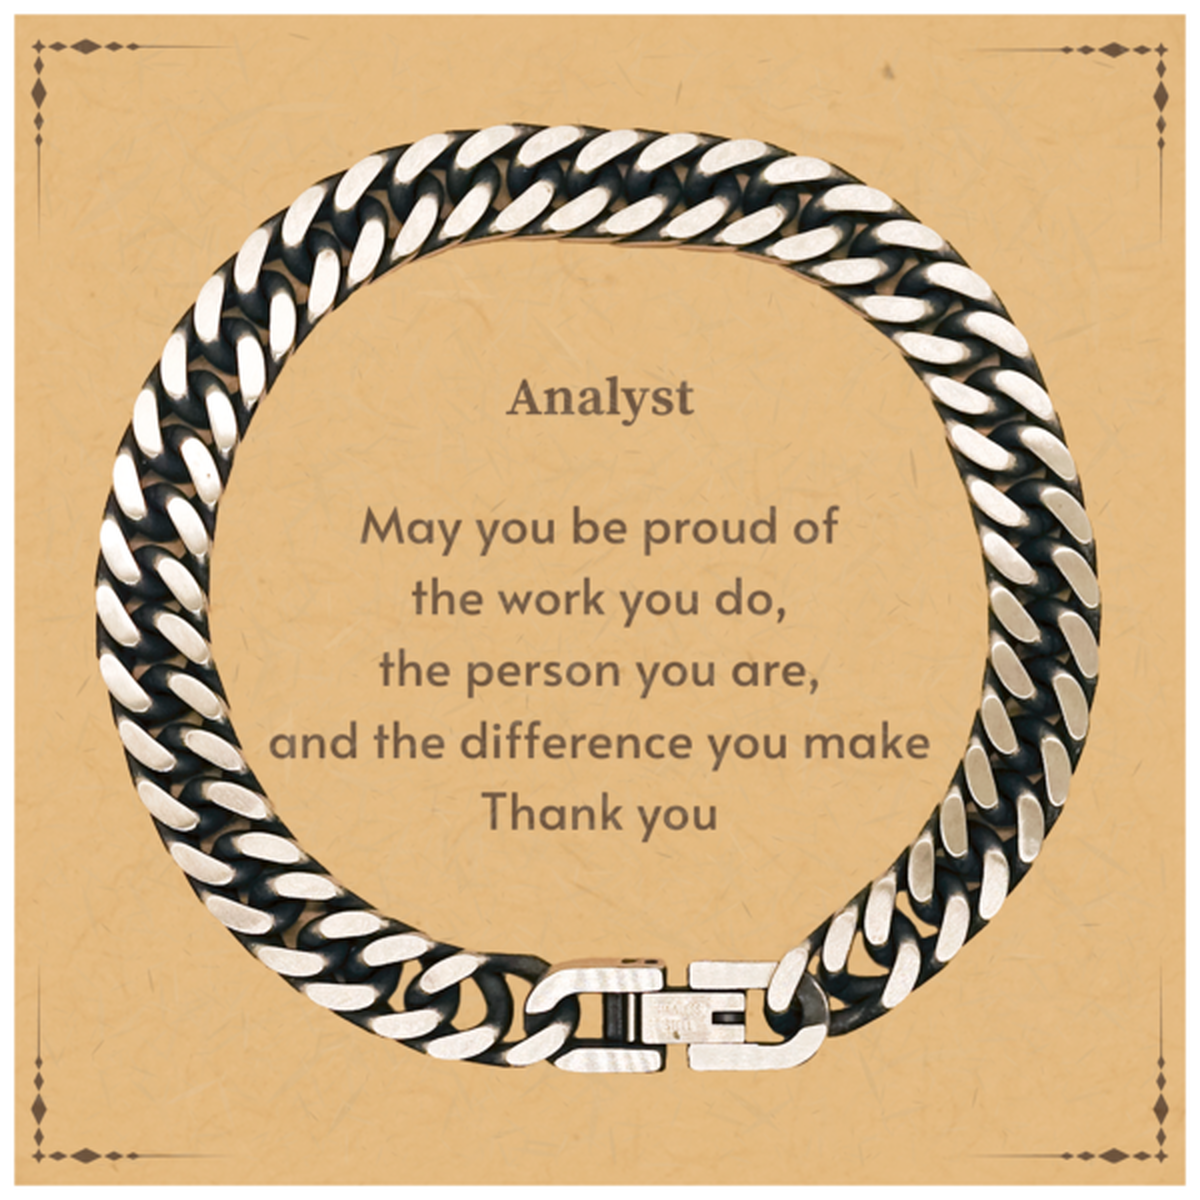 Heartwarming Cuban Link Chain Bracelet Retirement Coworkers Gifts for Analyst, Analyst May You be proud of the work you do, the person you are Gifts for Boss Men Women Friends